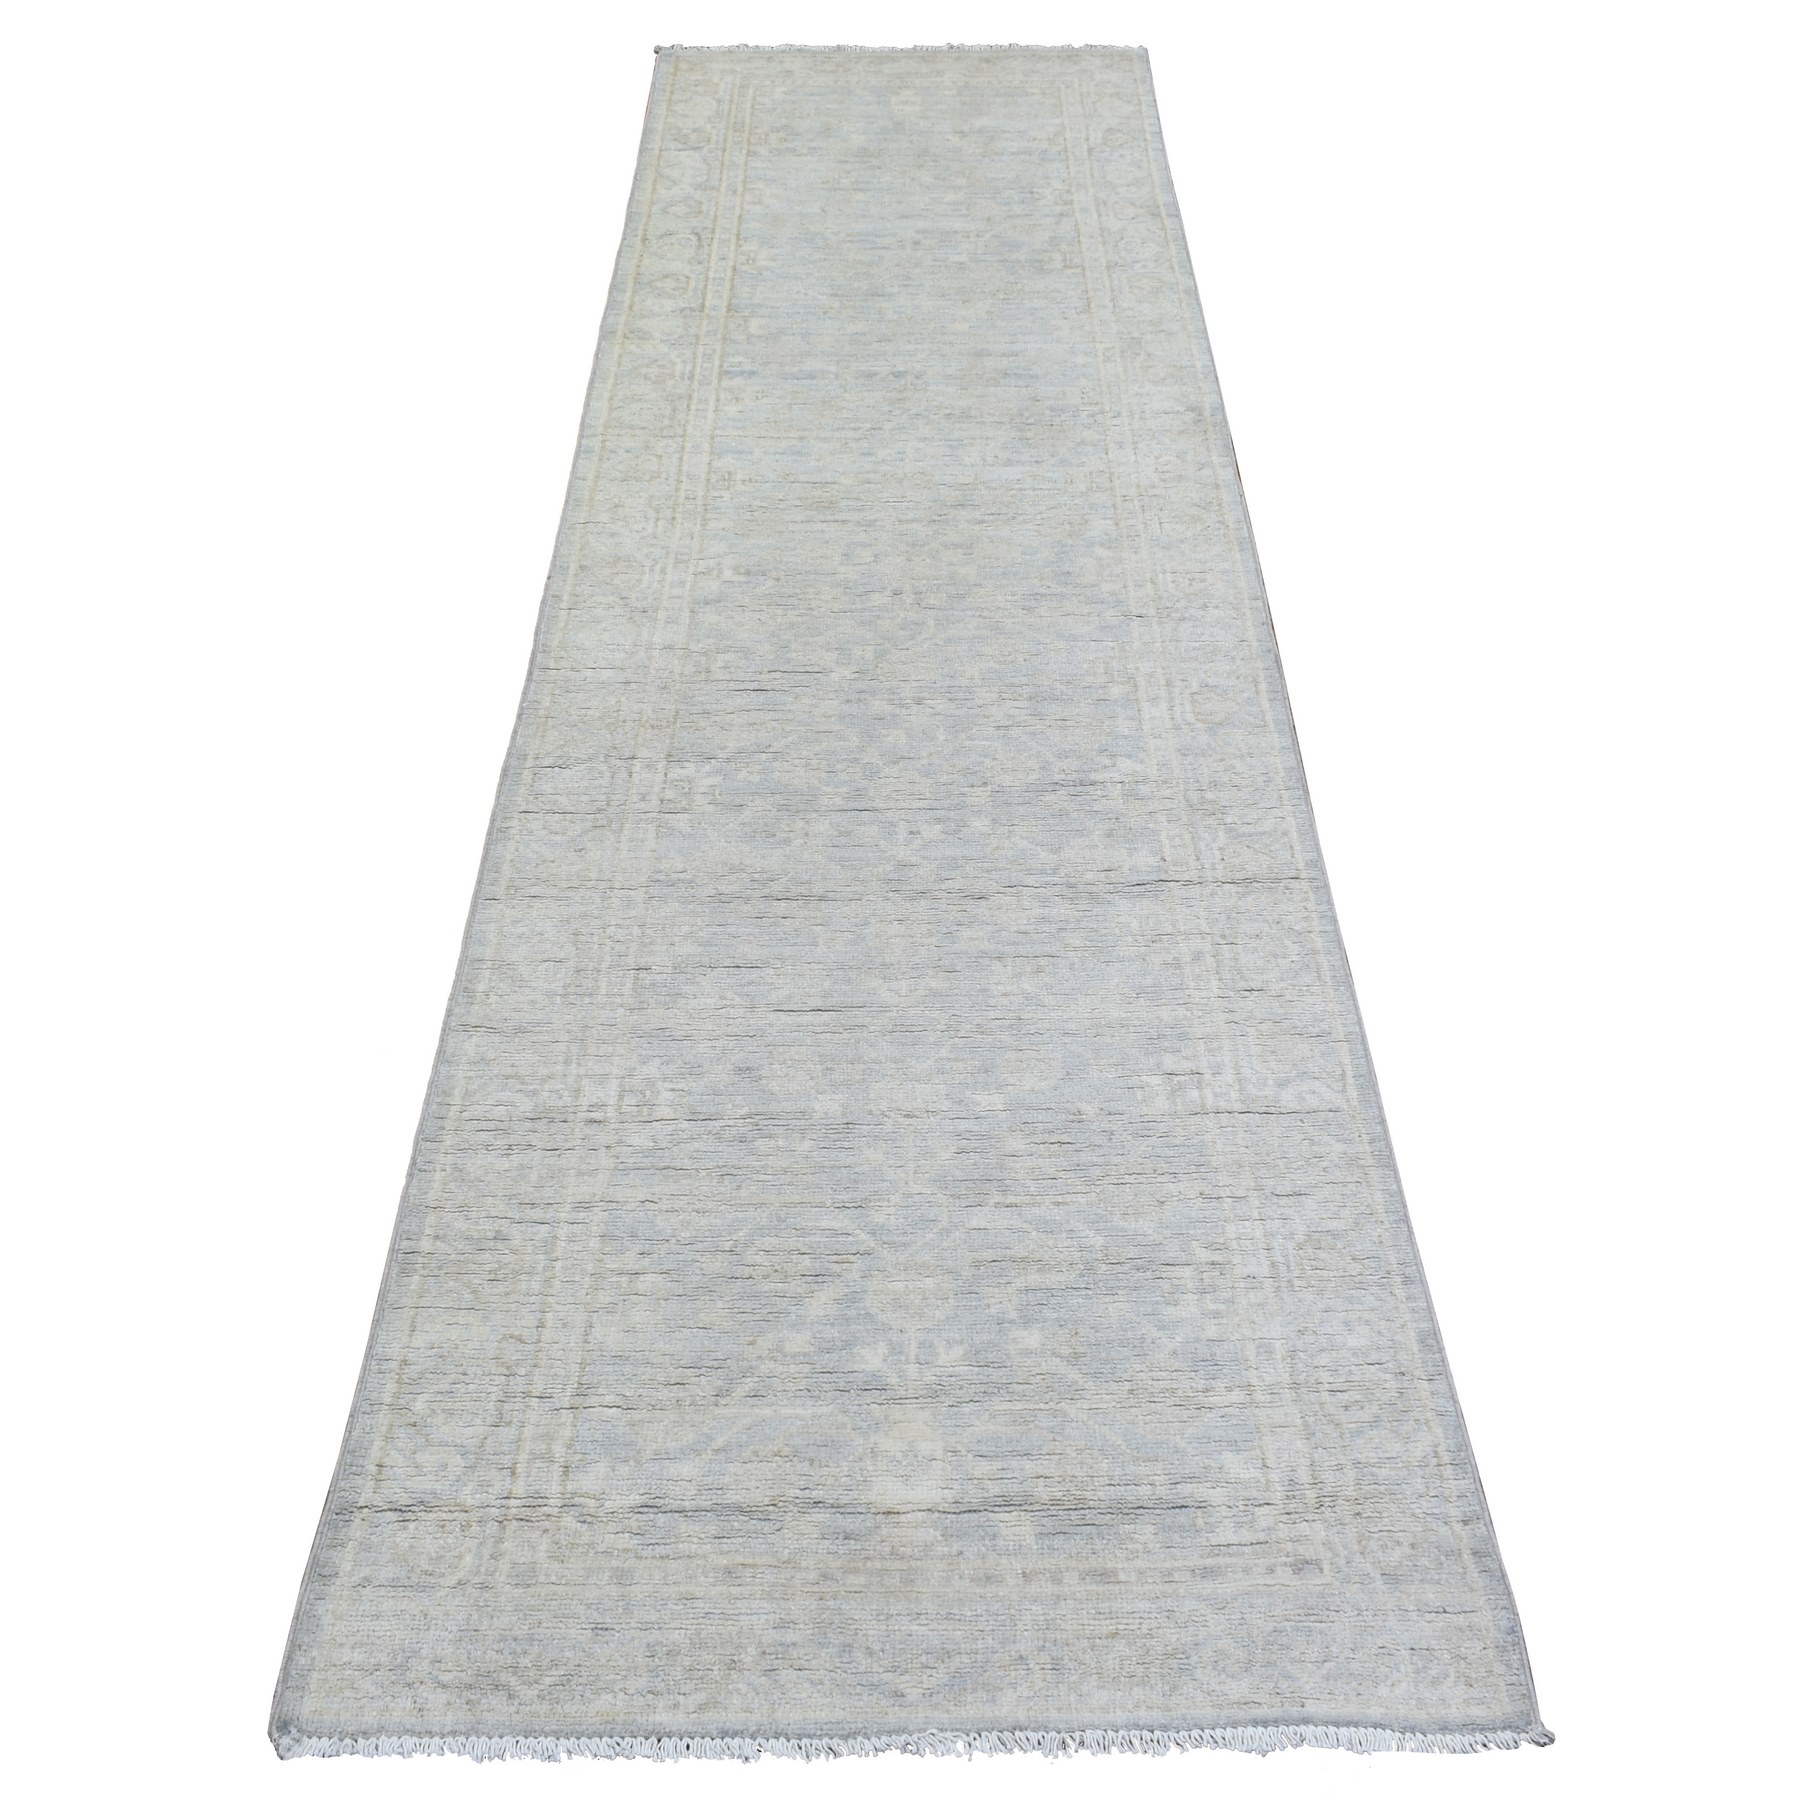 2'8"x9'6" Silver Blue, Hand Woven Washed Out Peshawar with All Over Design, Natural Dyes Soft and Shiny Wool, Runner Oriental Rug 